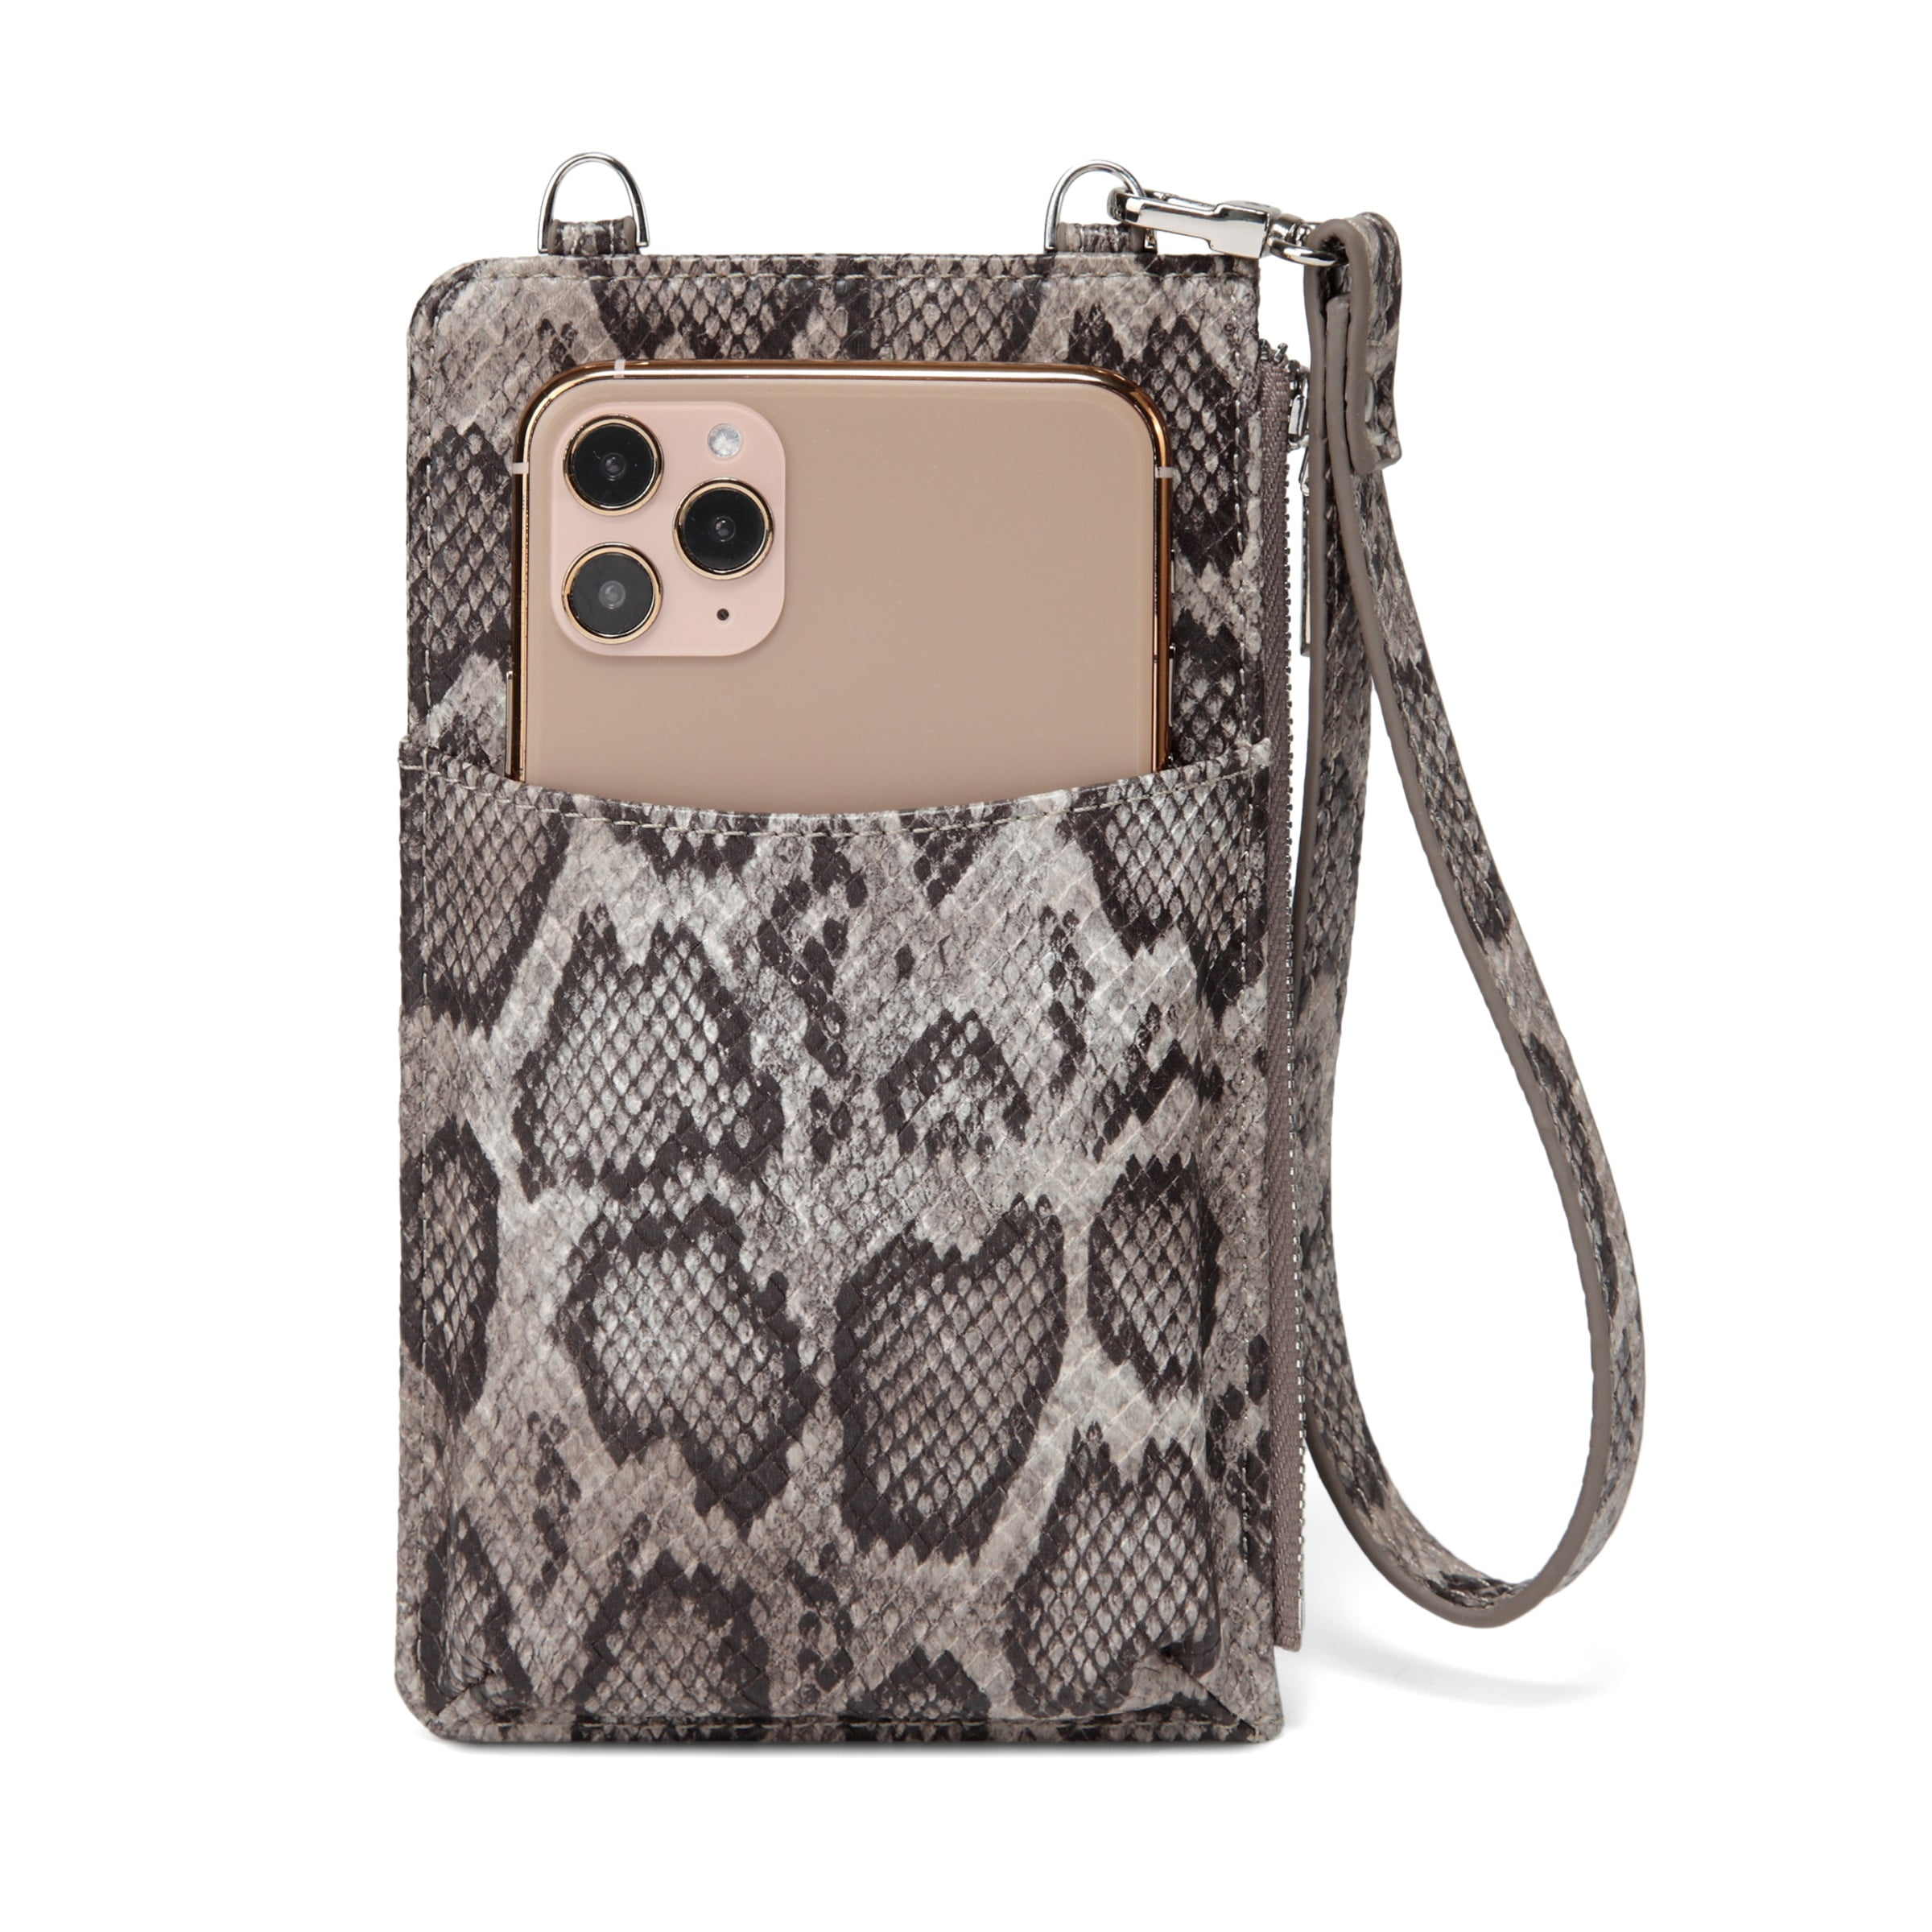 Daisy Rose Phone Holder Wallet and Cross Body Bag - RFID Blocking Wristlet with Card Slots and Zip Pocket -PU Vegan Leather - Grey Snake